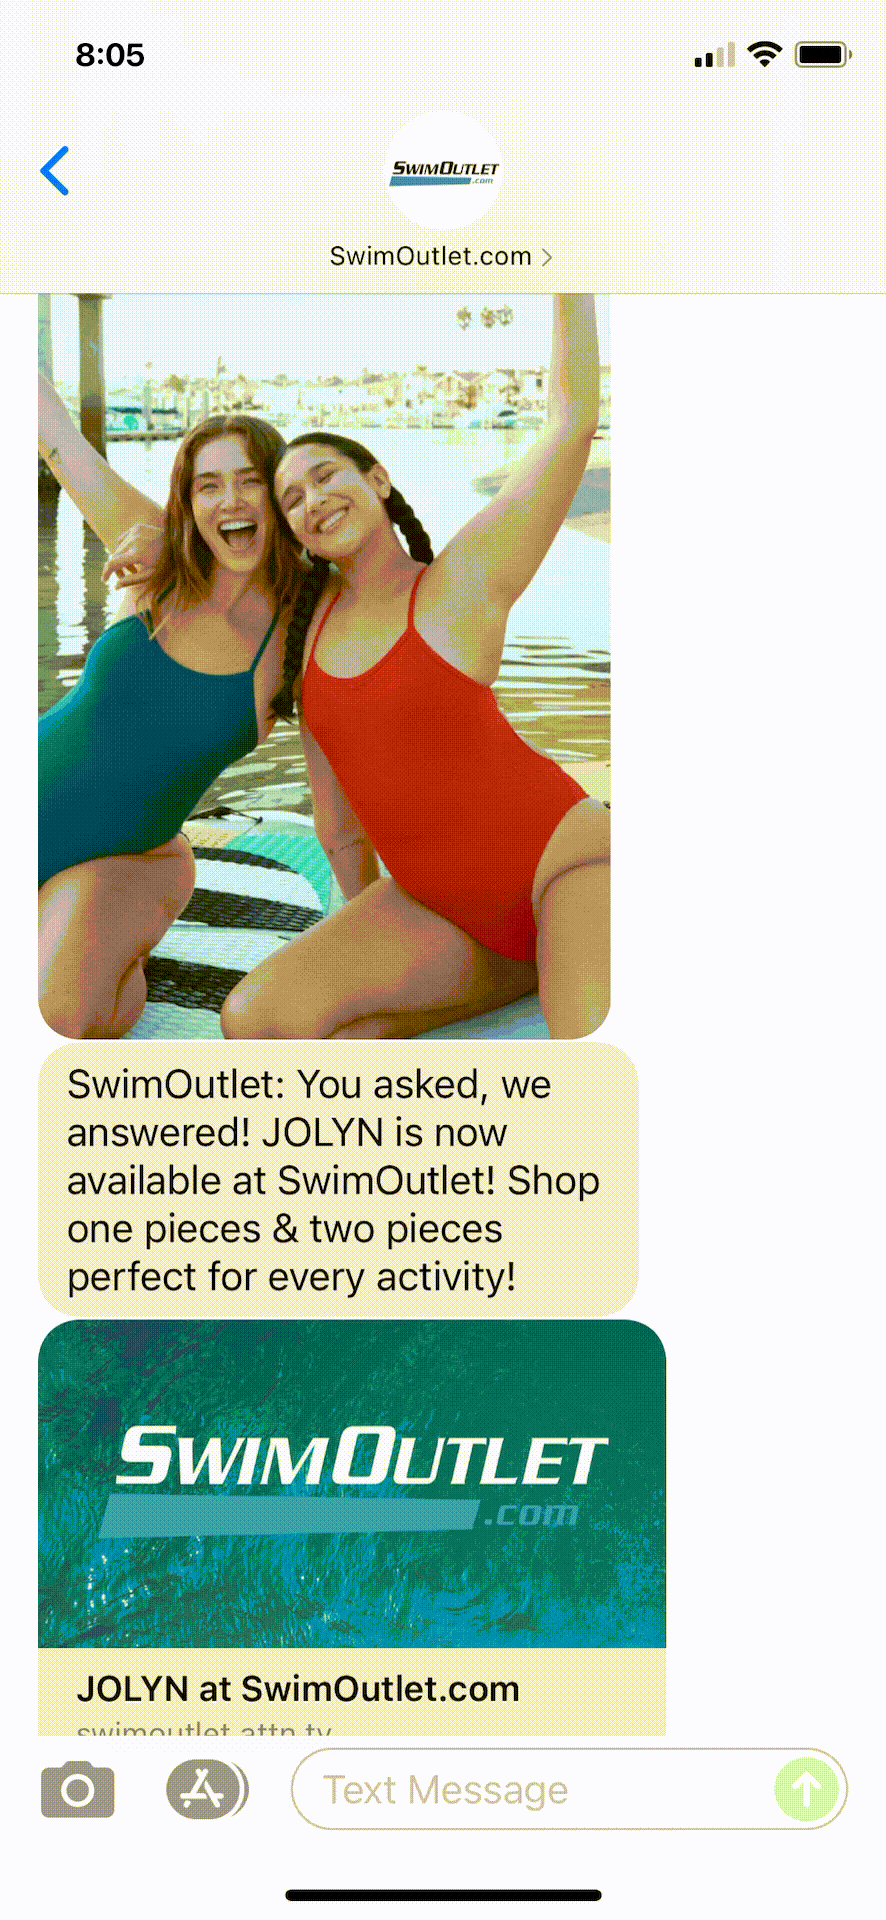 SwimOutlet.com-Text-Message-Marketing-Example-09.11.2021